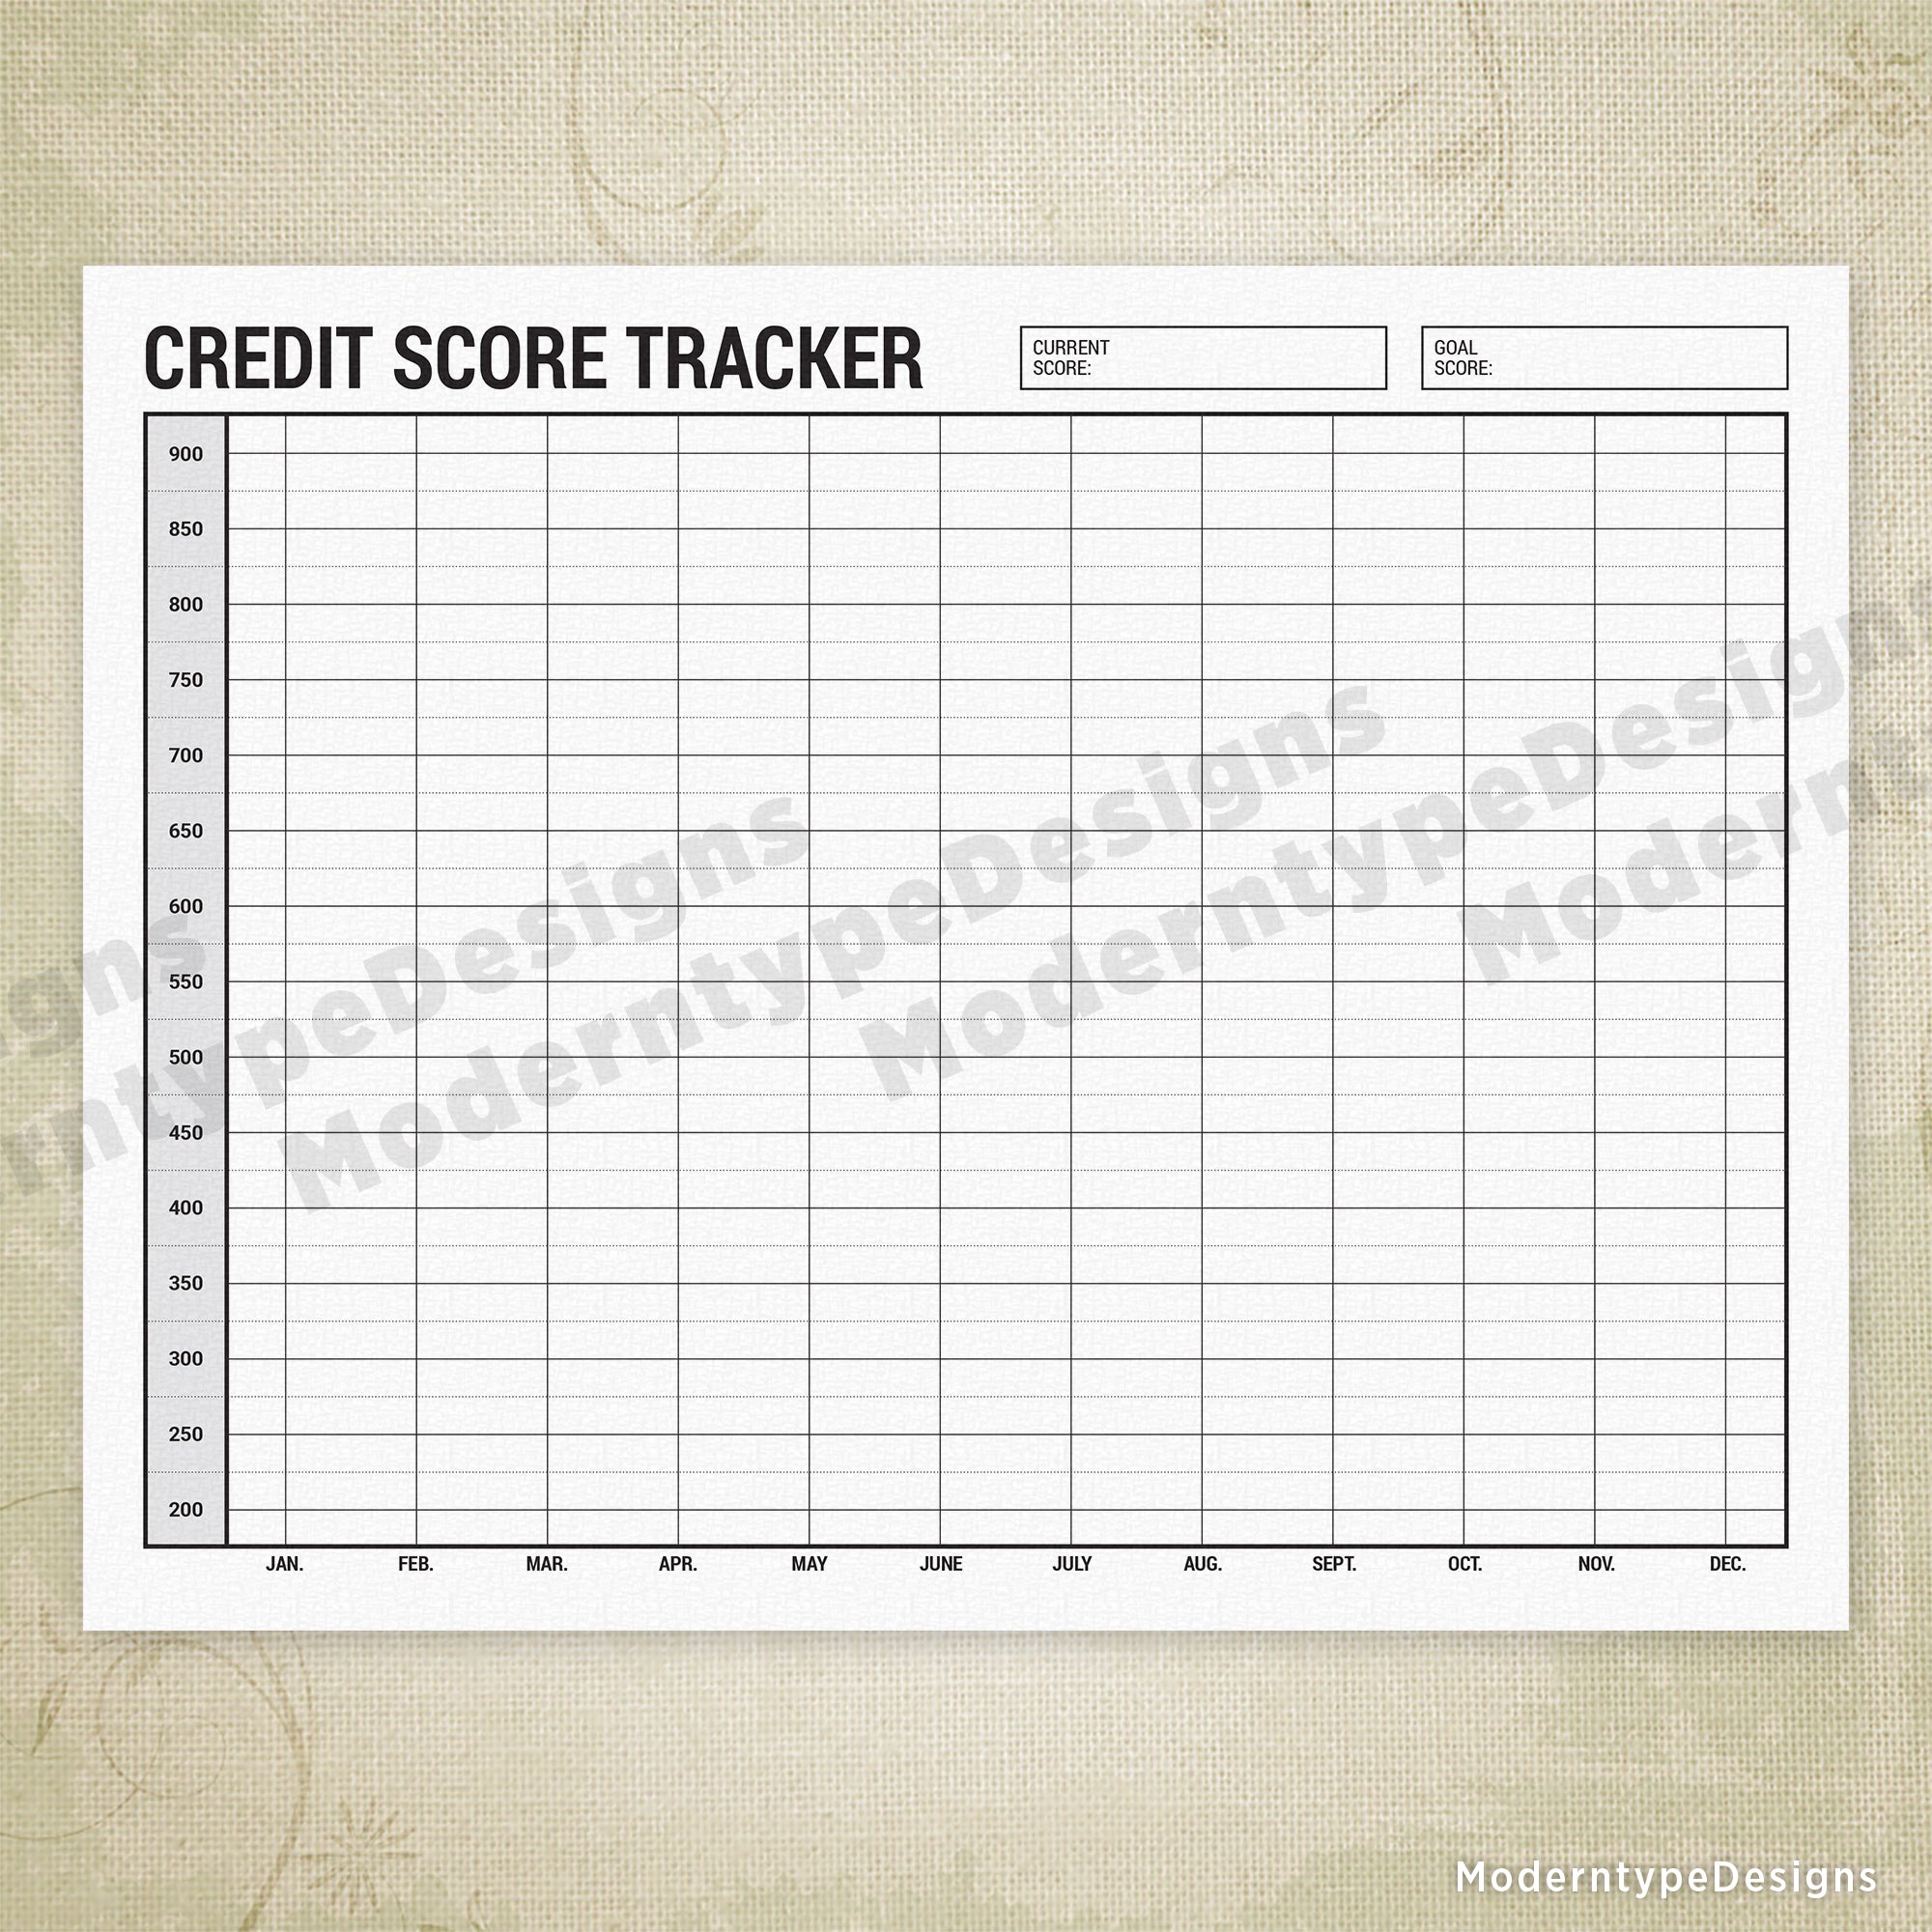 User-friendly credit score tracking